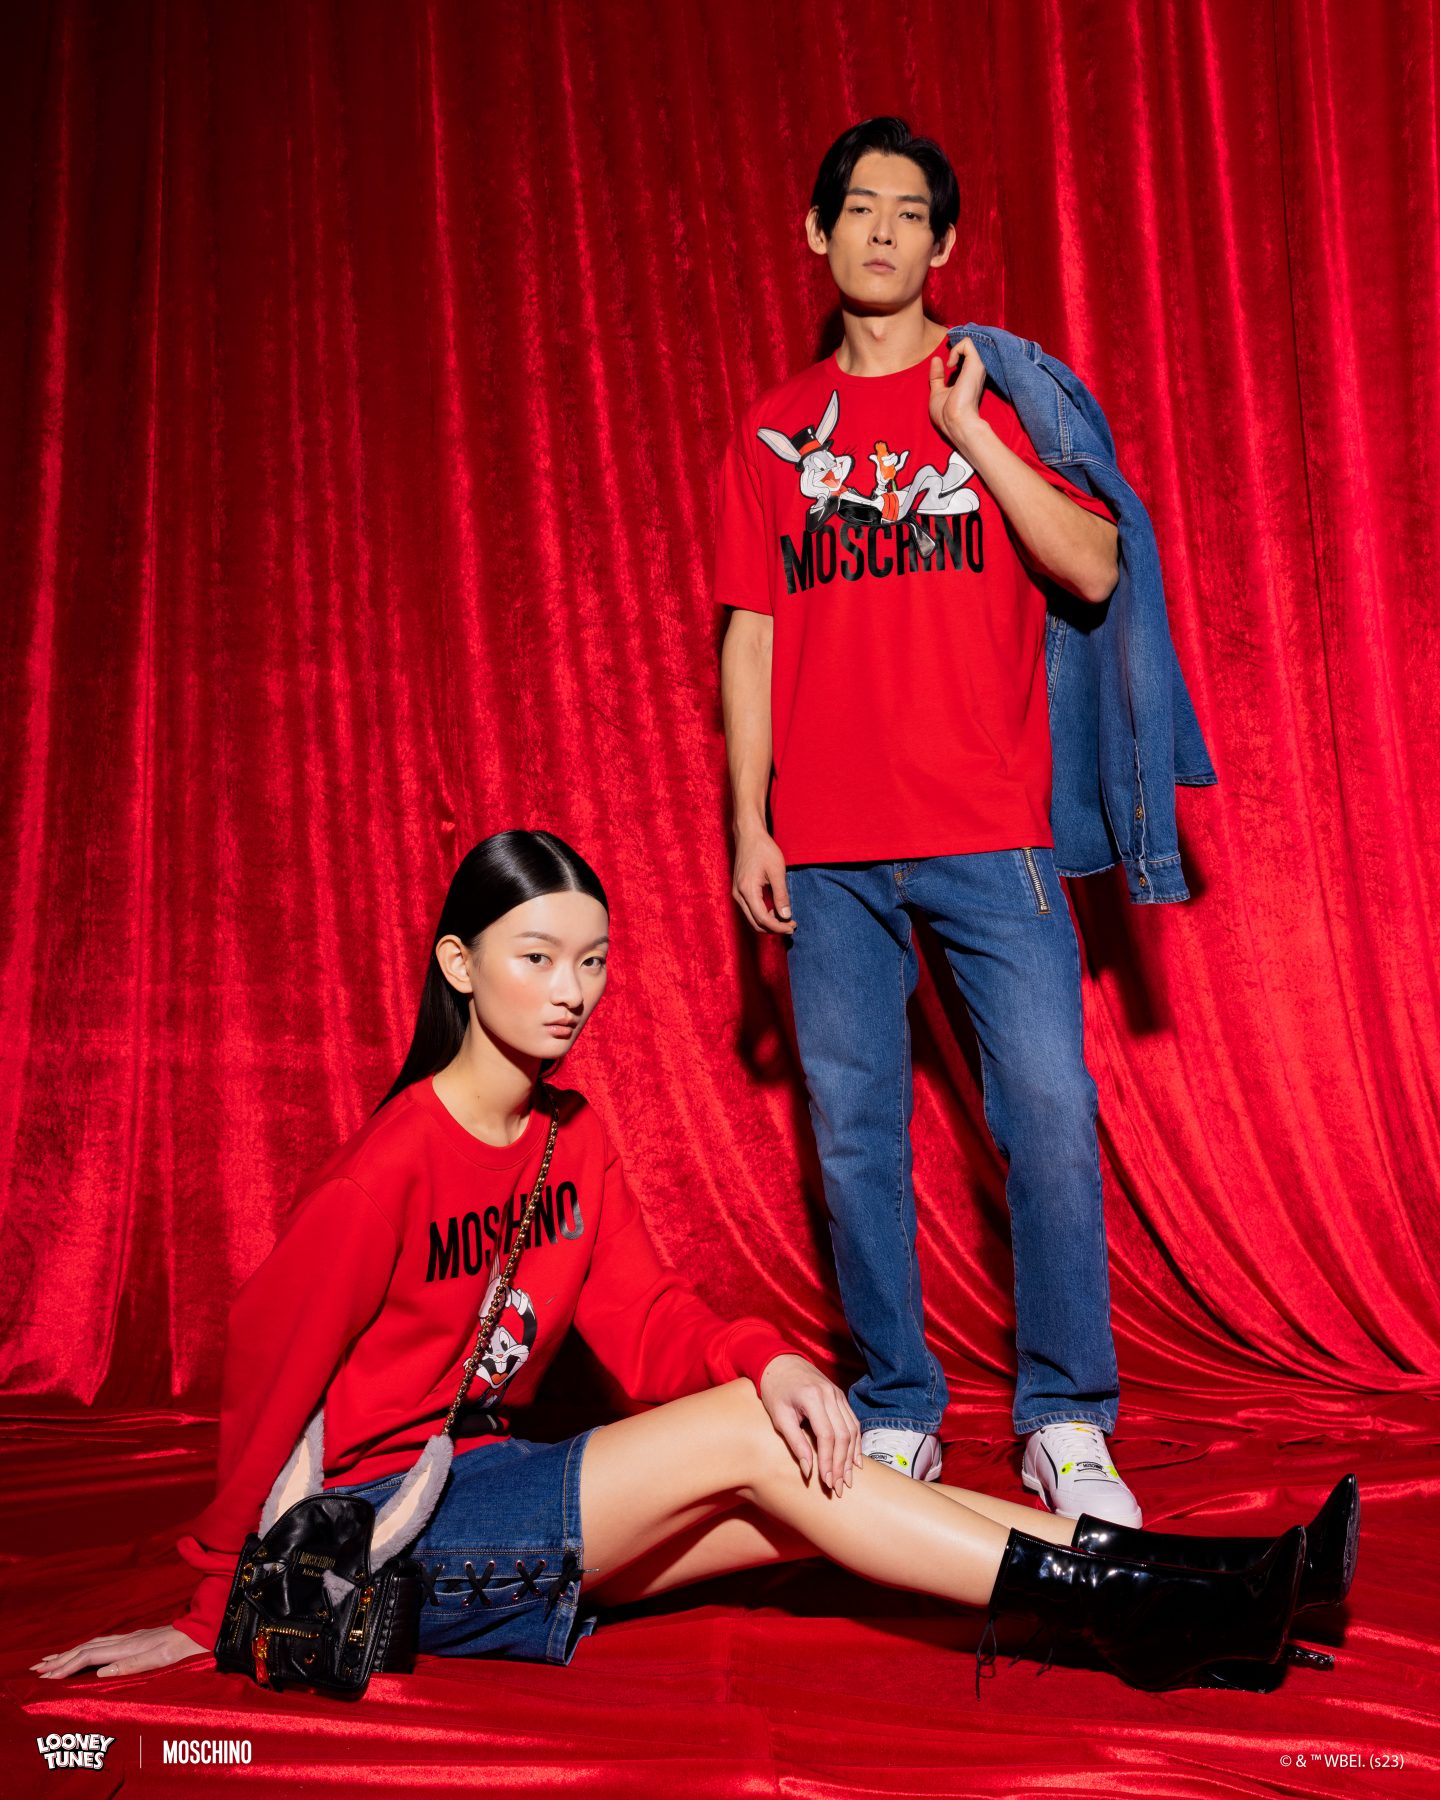 9 best Lunar New Year luxury fashion collections for 2023: from Gucci's  silk shirts and Louis Vuitton's classic red prints, to Dior's playful Year  of the Rabbit motif and Givenchy's cute Disney collab